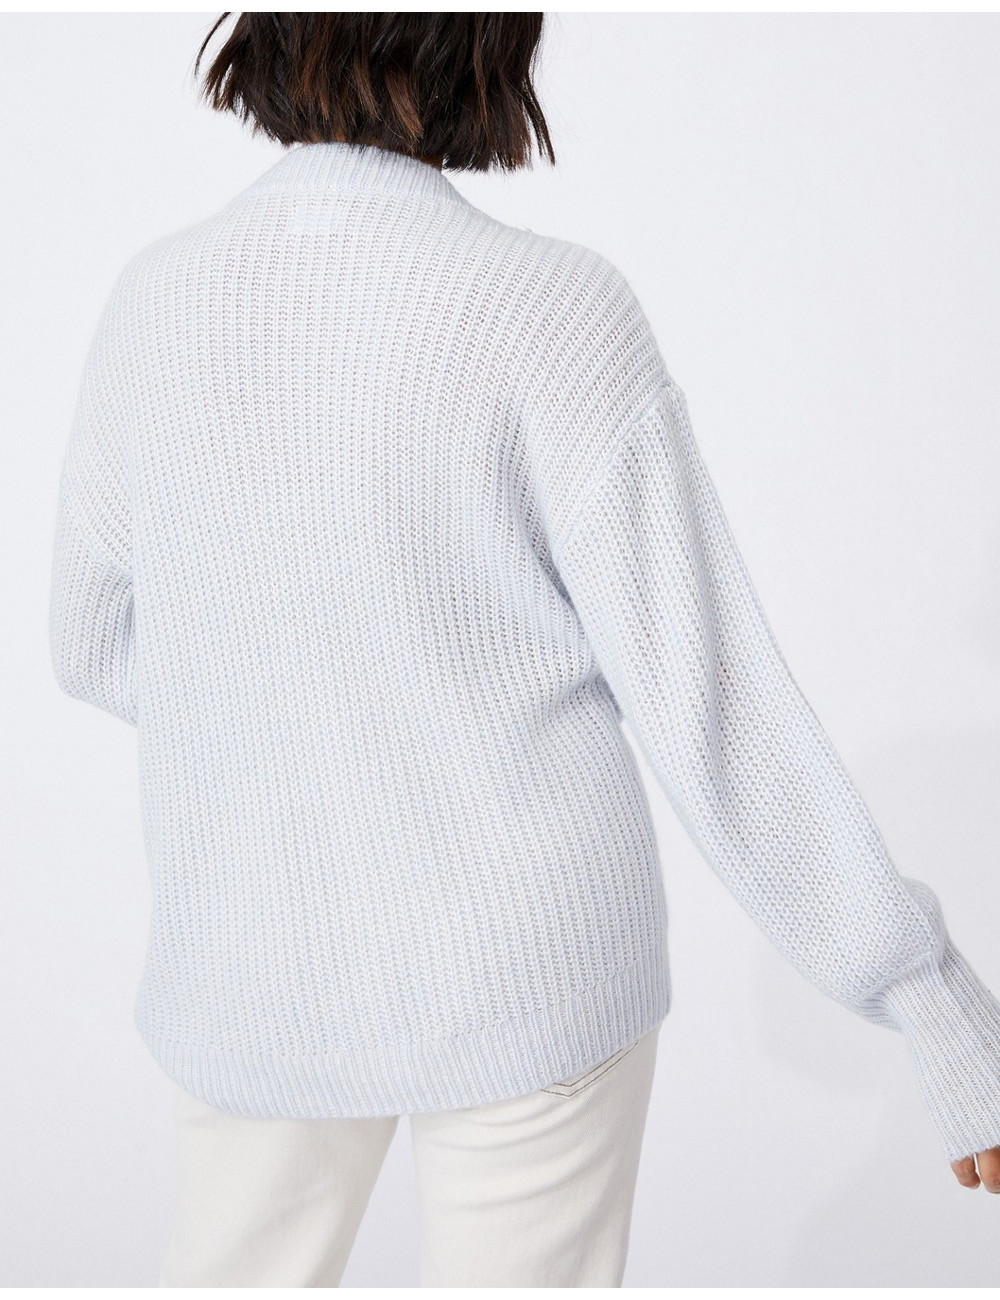 Cotton:On dad cardigan in blue